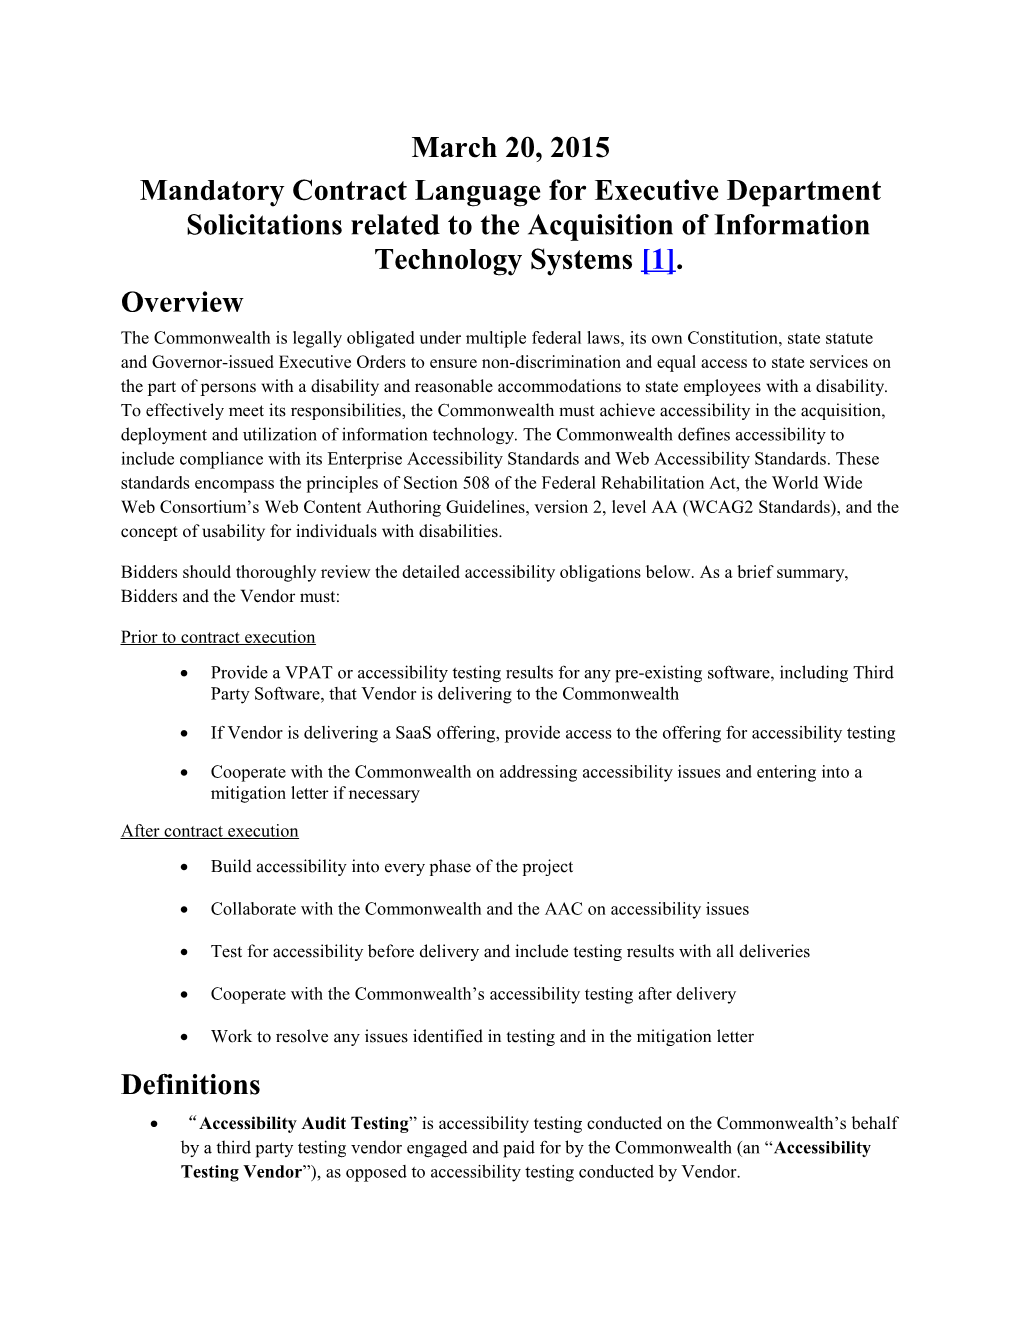 Mandatory Contract Language for Executive Department Solicitations Related to the Acquisition